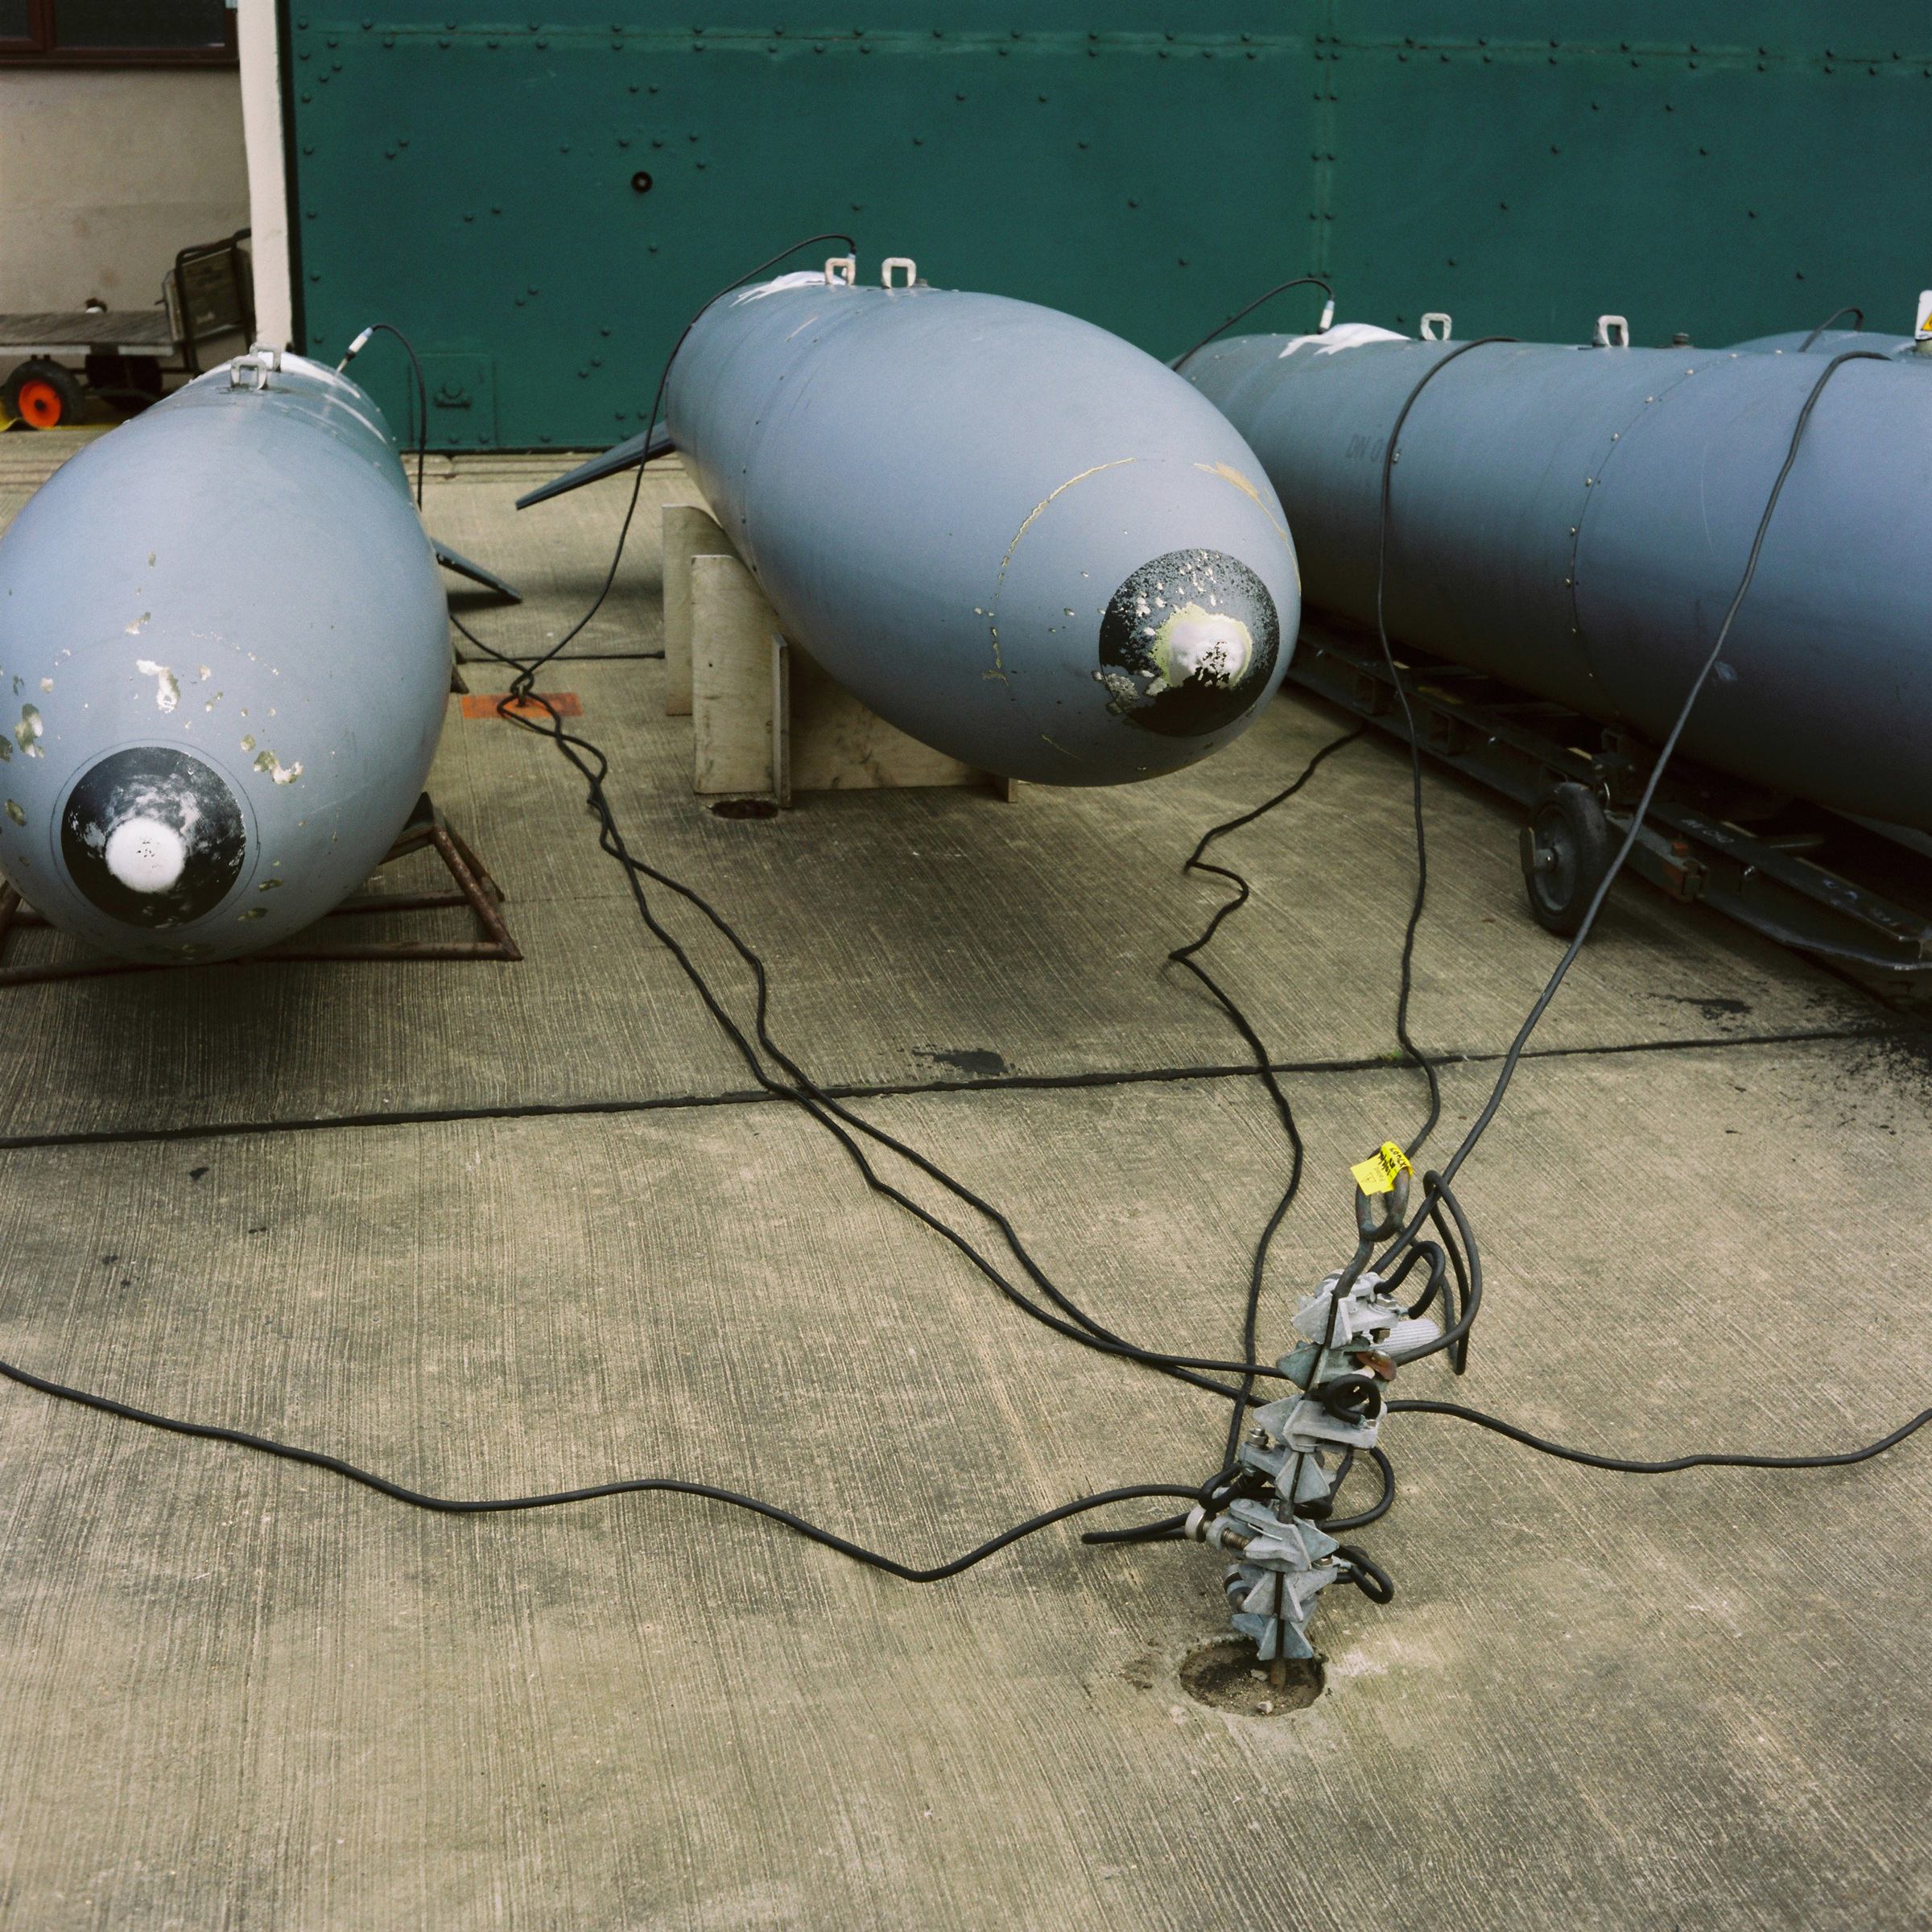 Three large fuel pods (pointing towards viewer) with wires drawn together and plugged into single socket set in concrete